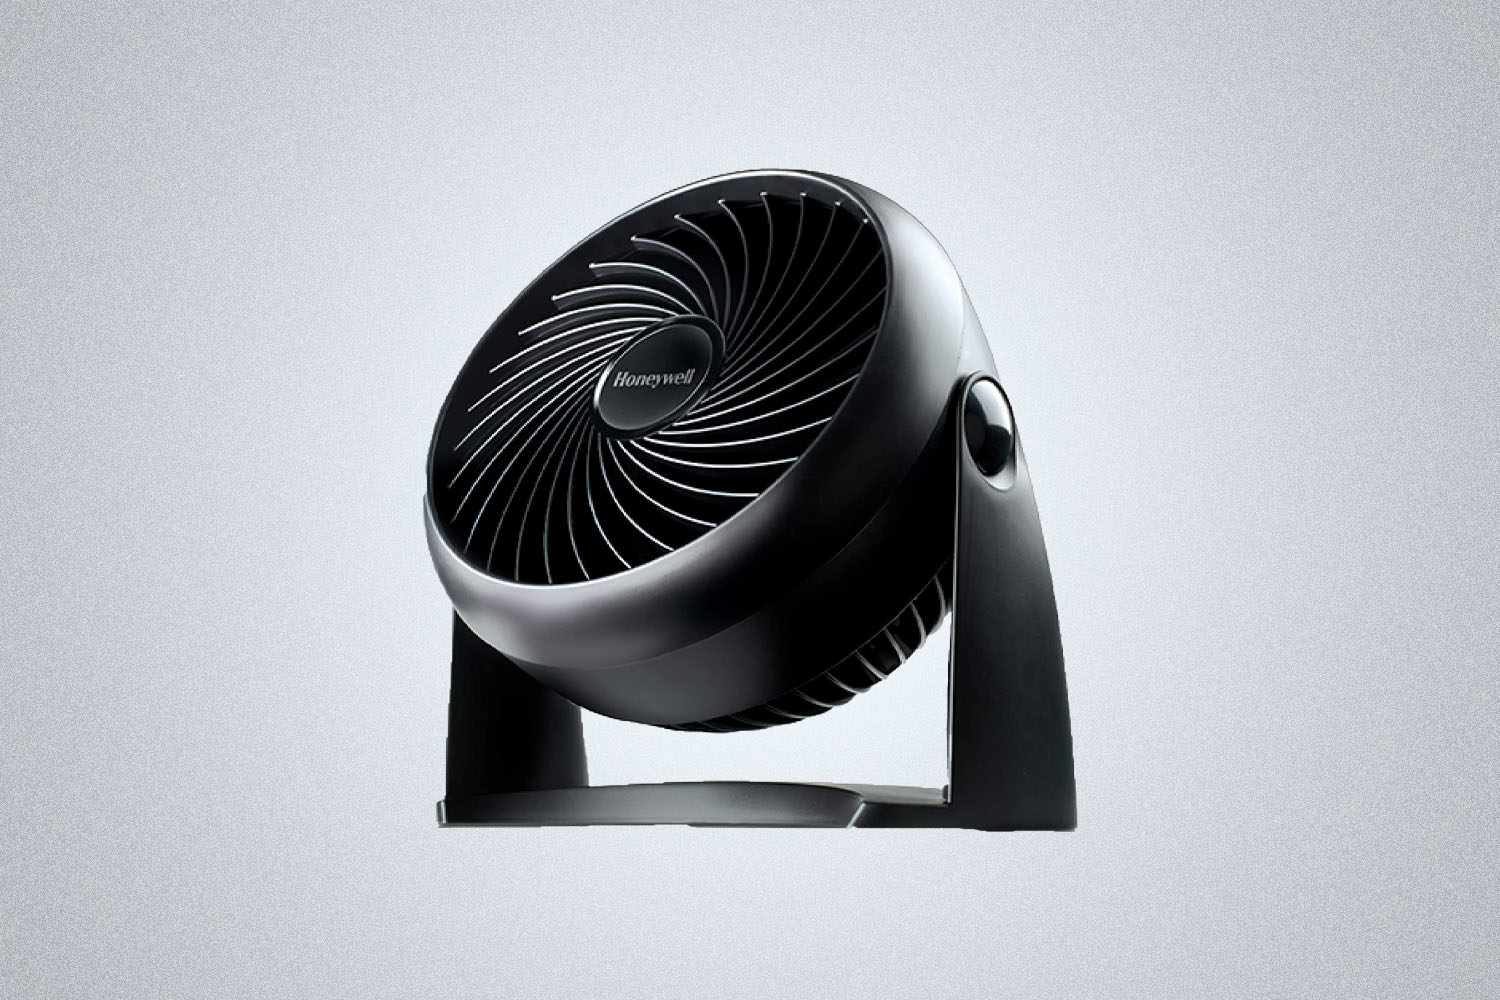 The Honeywell TurboForce fan is a great product to fall asleep in 2022